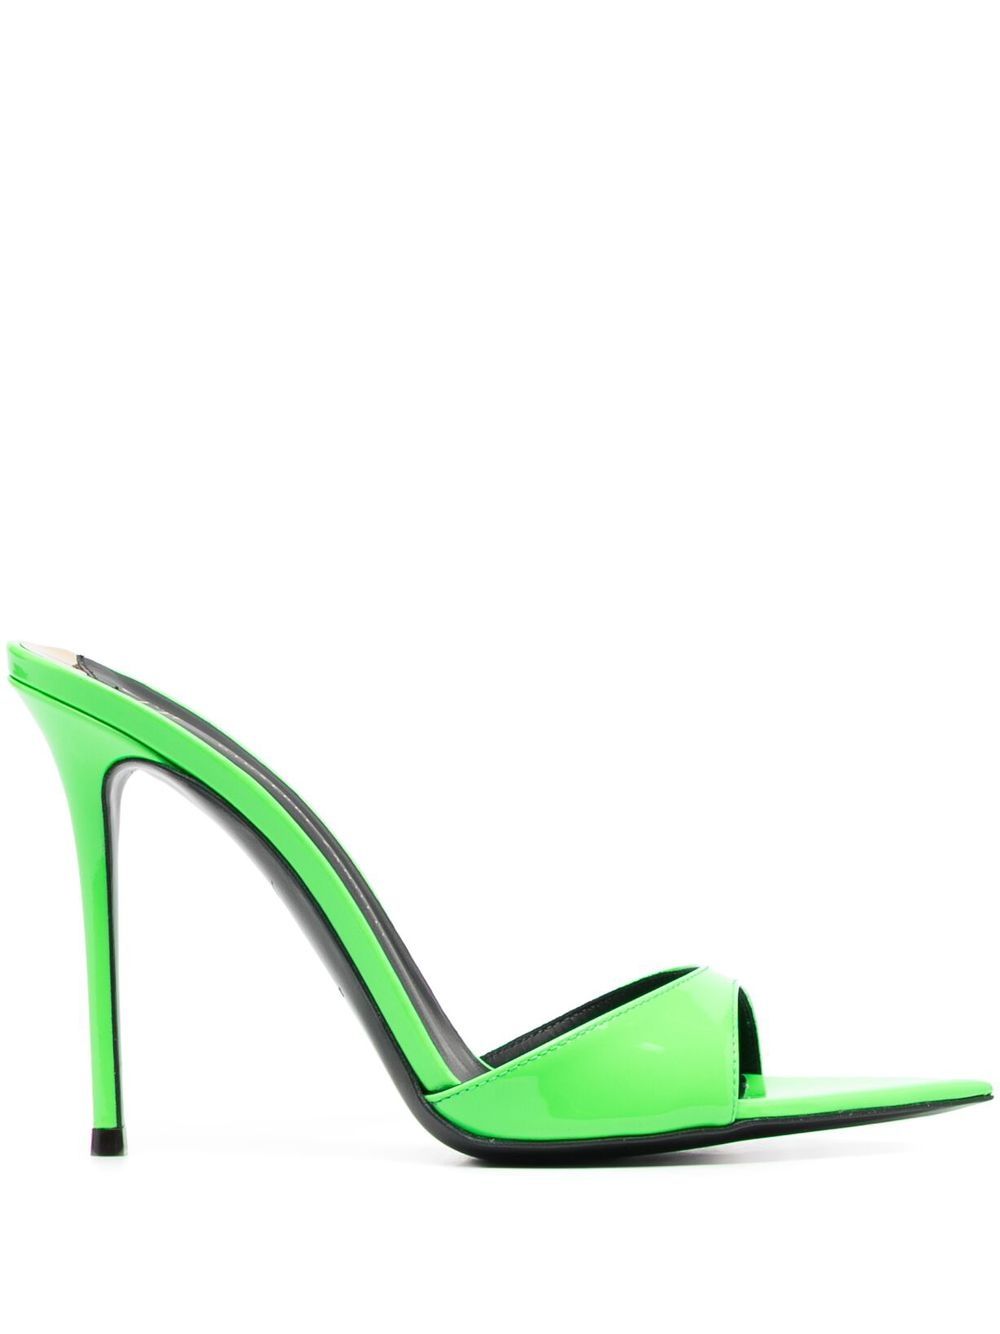 Giuseppe Zanotti Design GIUSEPPE ZANOTTI DESIGN- Patent Leather Heel Mules